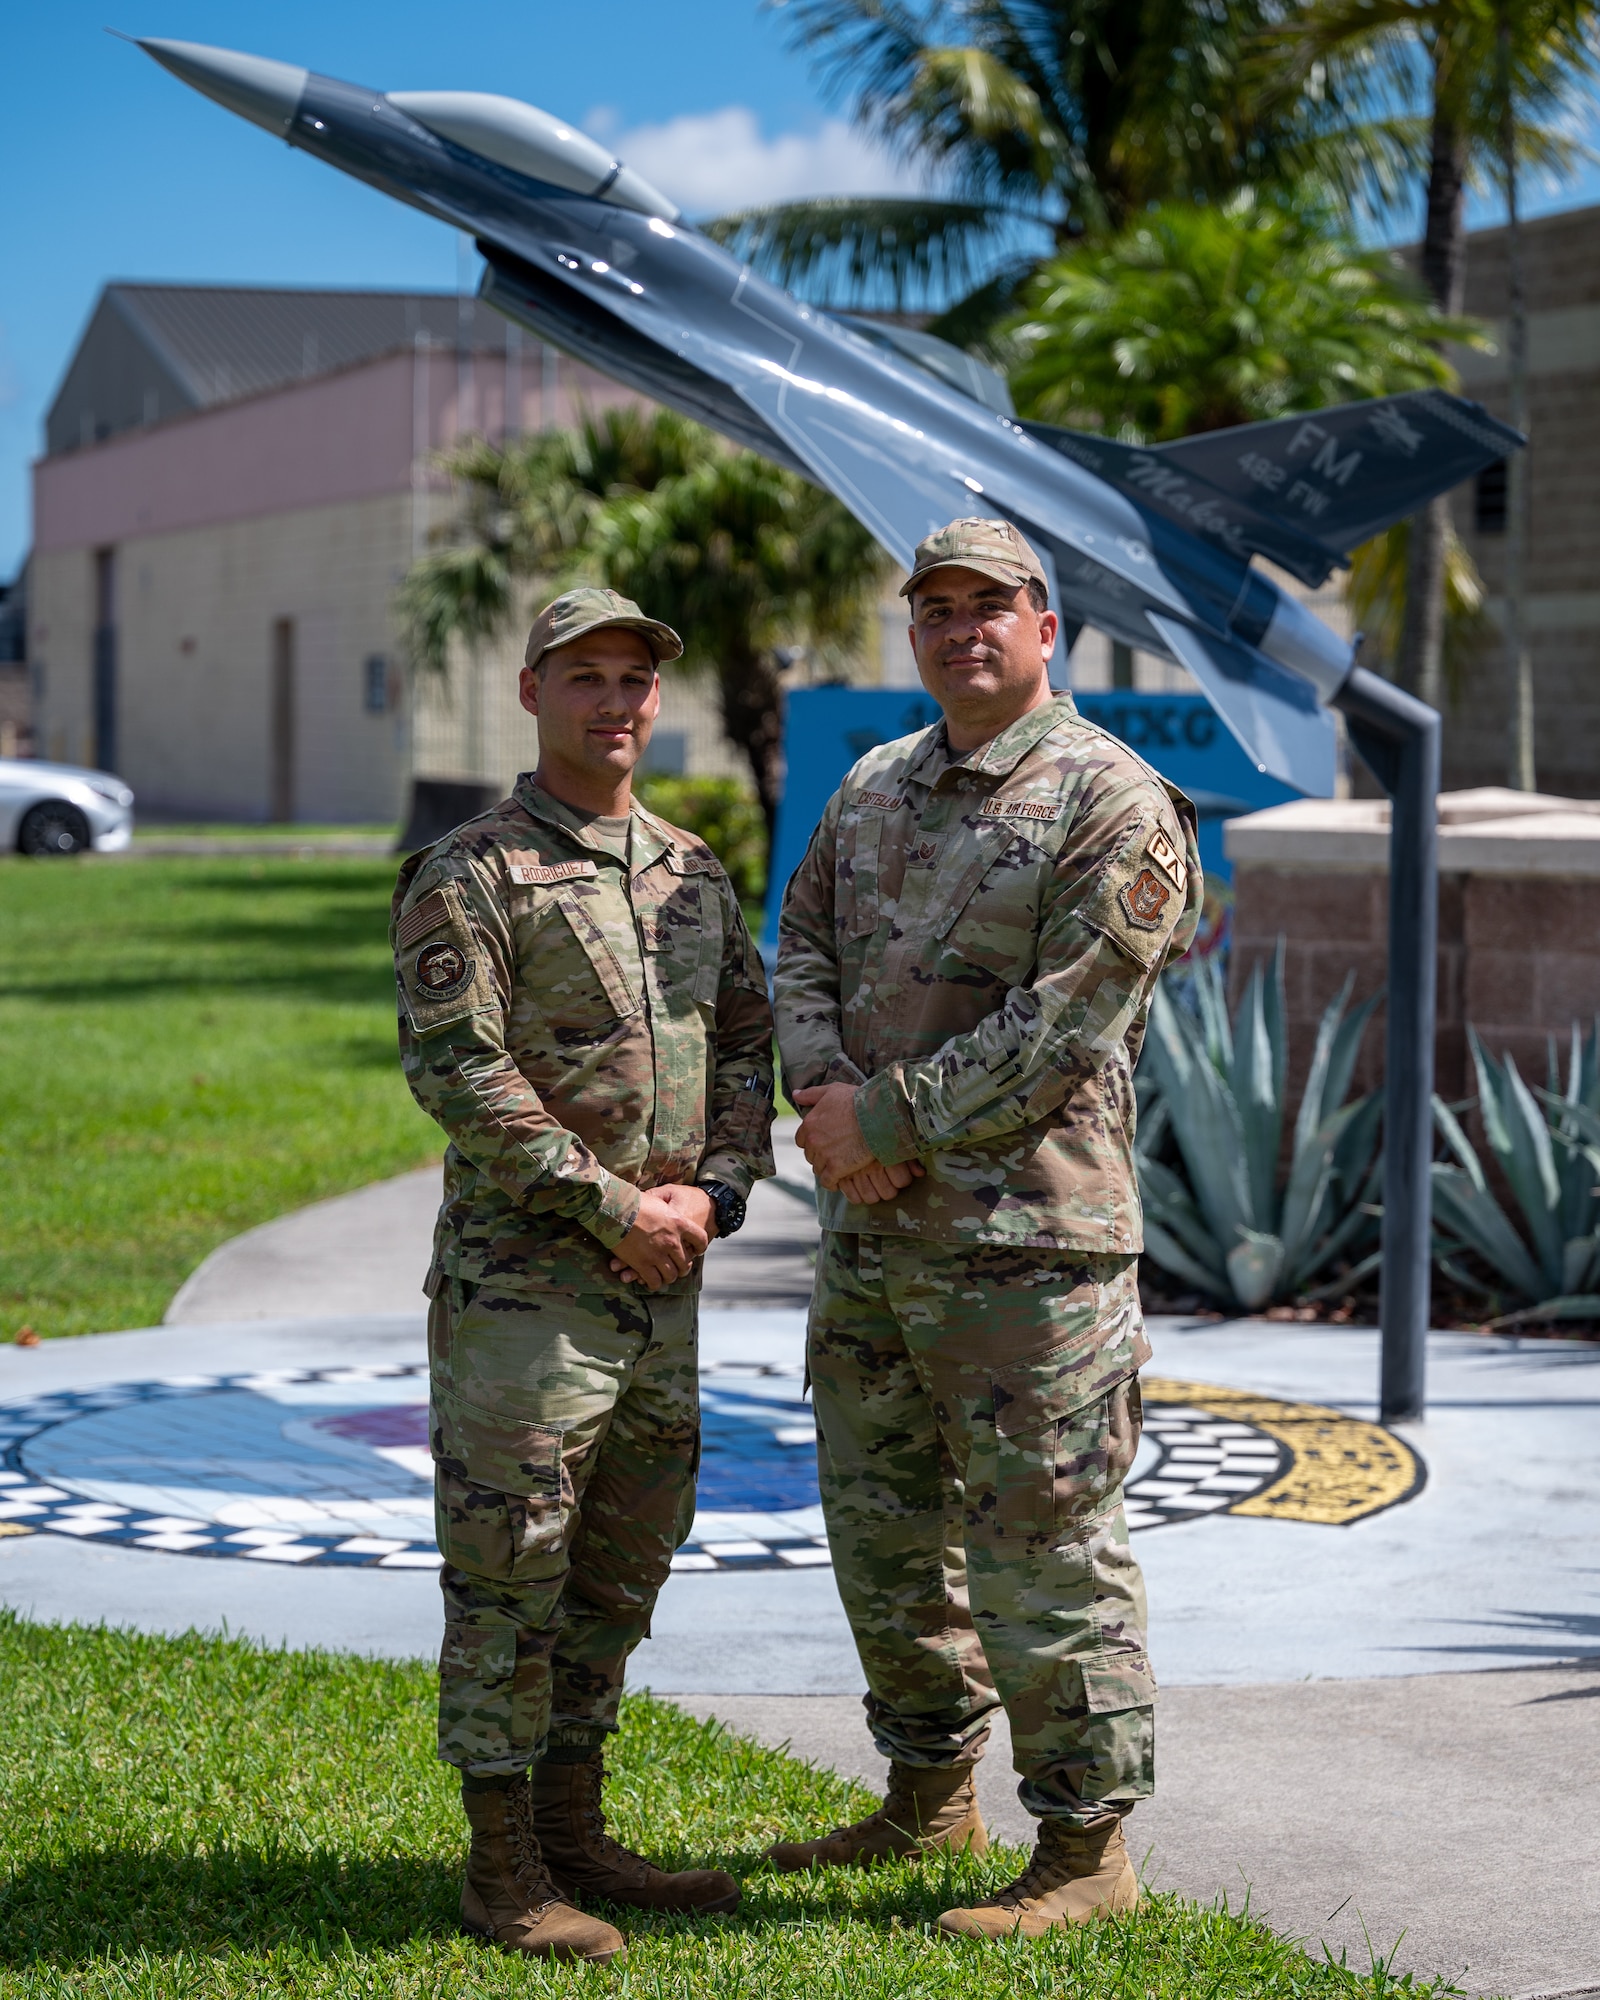 Senior Airman Randy Rodriguez, 70th Aerial Port Squadron Aerial Porter, and Tech. Sgt. Lionel Castellano, 482nd Fighter Wing Public Affairs Specialist, saved a woman in the early hours of Sept. 10, 2022.